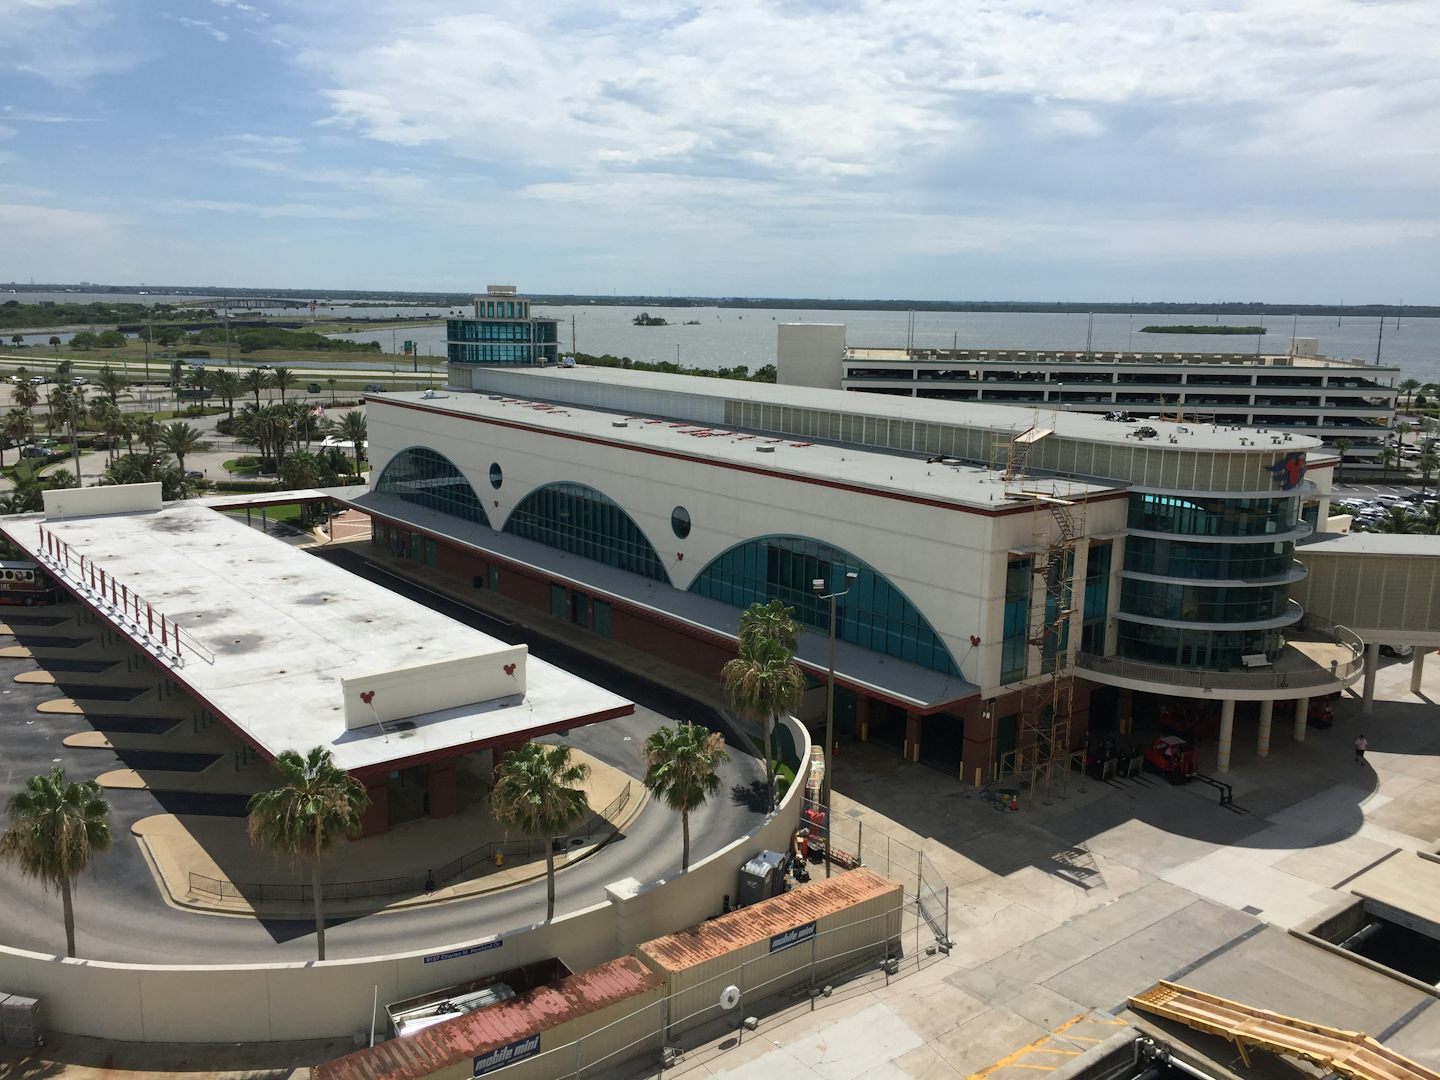 Disney Cruise Line Terminal at Port Canaveral